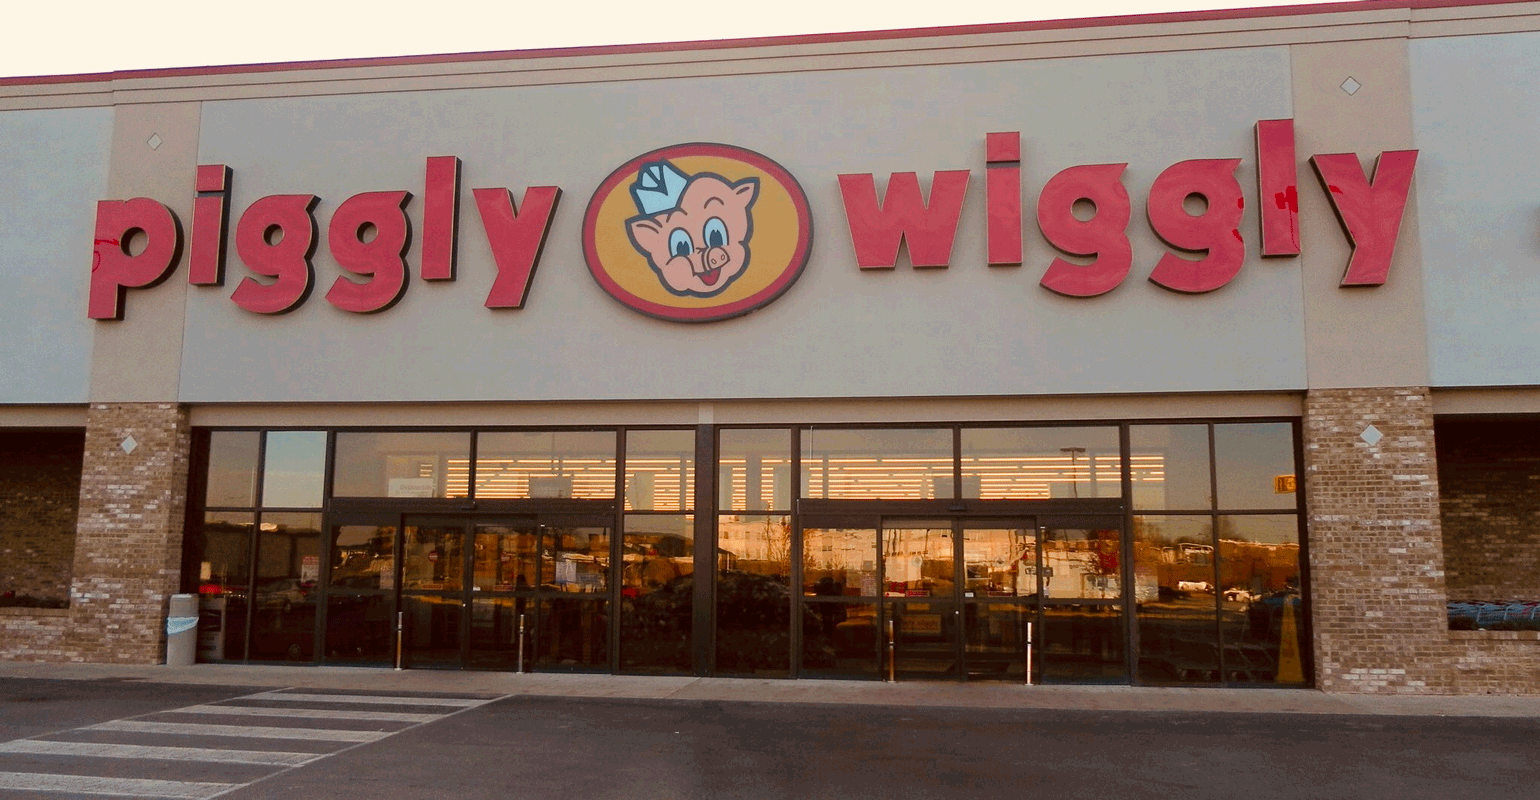 piggly wiggly boaz weekly ad